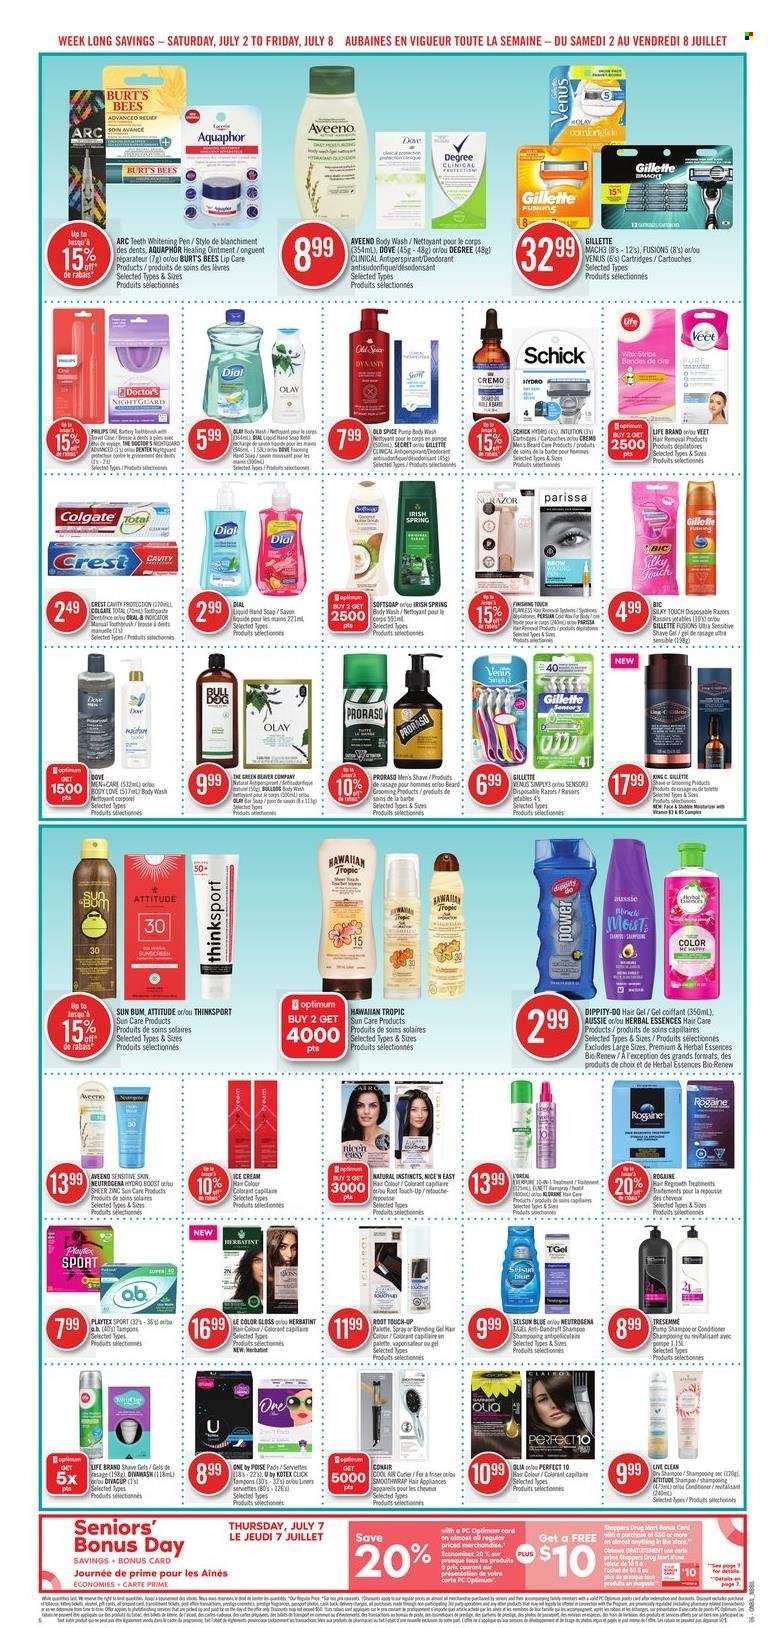 thumbnail - Shoppers Drug Mart Flyer - July 02, 2022 - July 08, 2022 - Sales products - Philips, ice cream, spice, Boost, Aquaphor, Aveeno, ointment, body wash, hand soap, Dial, soap, toothbrush, Crest, Playtex, Kotex, tampons, Gillette, L’Oréal, Olay, Root Touch-Up, Aussie, conditioner, TRESemmé, Palette, hair color, Herbal Essences, anti-perspirant, BIC, shave gel, Schick, Venus, hair removal, shaver, Veet, wax strips, disposable razor, lid, Optimum, zinc, Dove, Colgate, Neutrogena, shampoo, Old Spice, deodorant. Page 8.